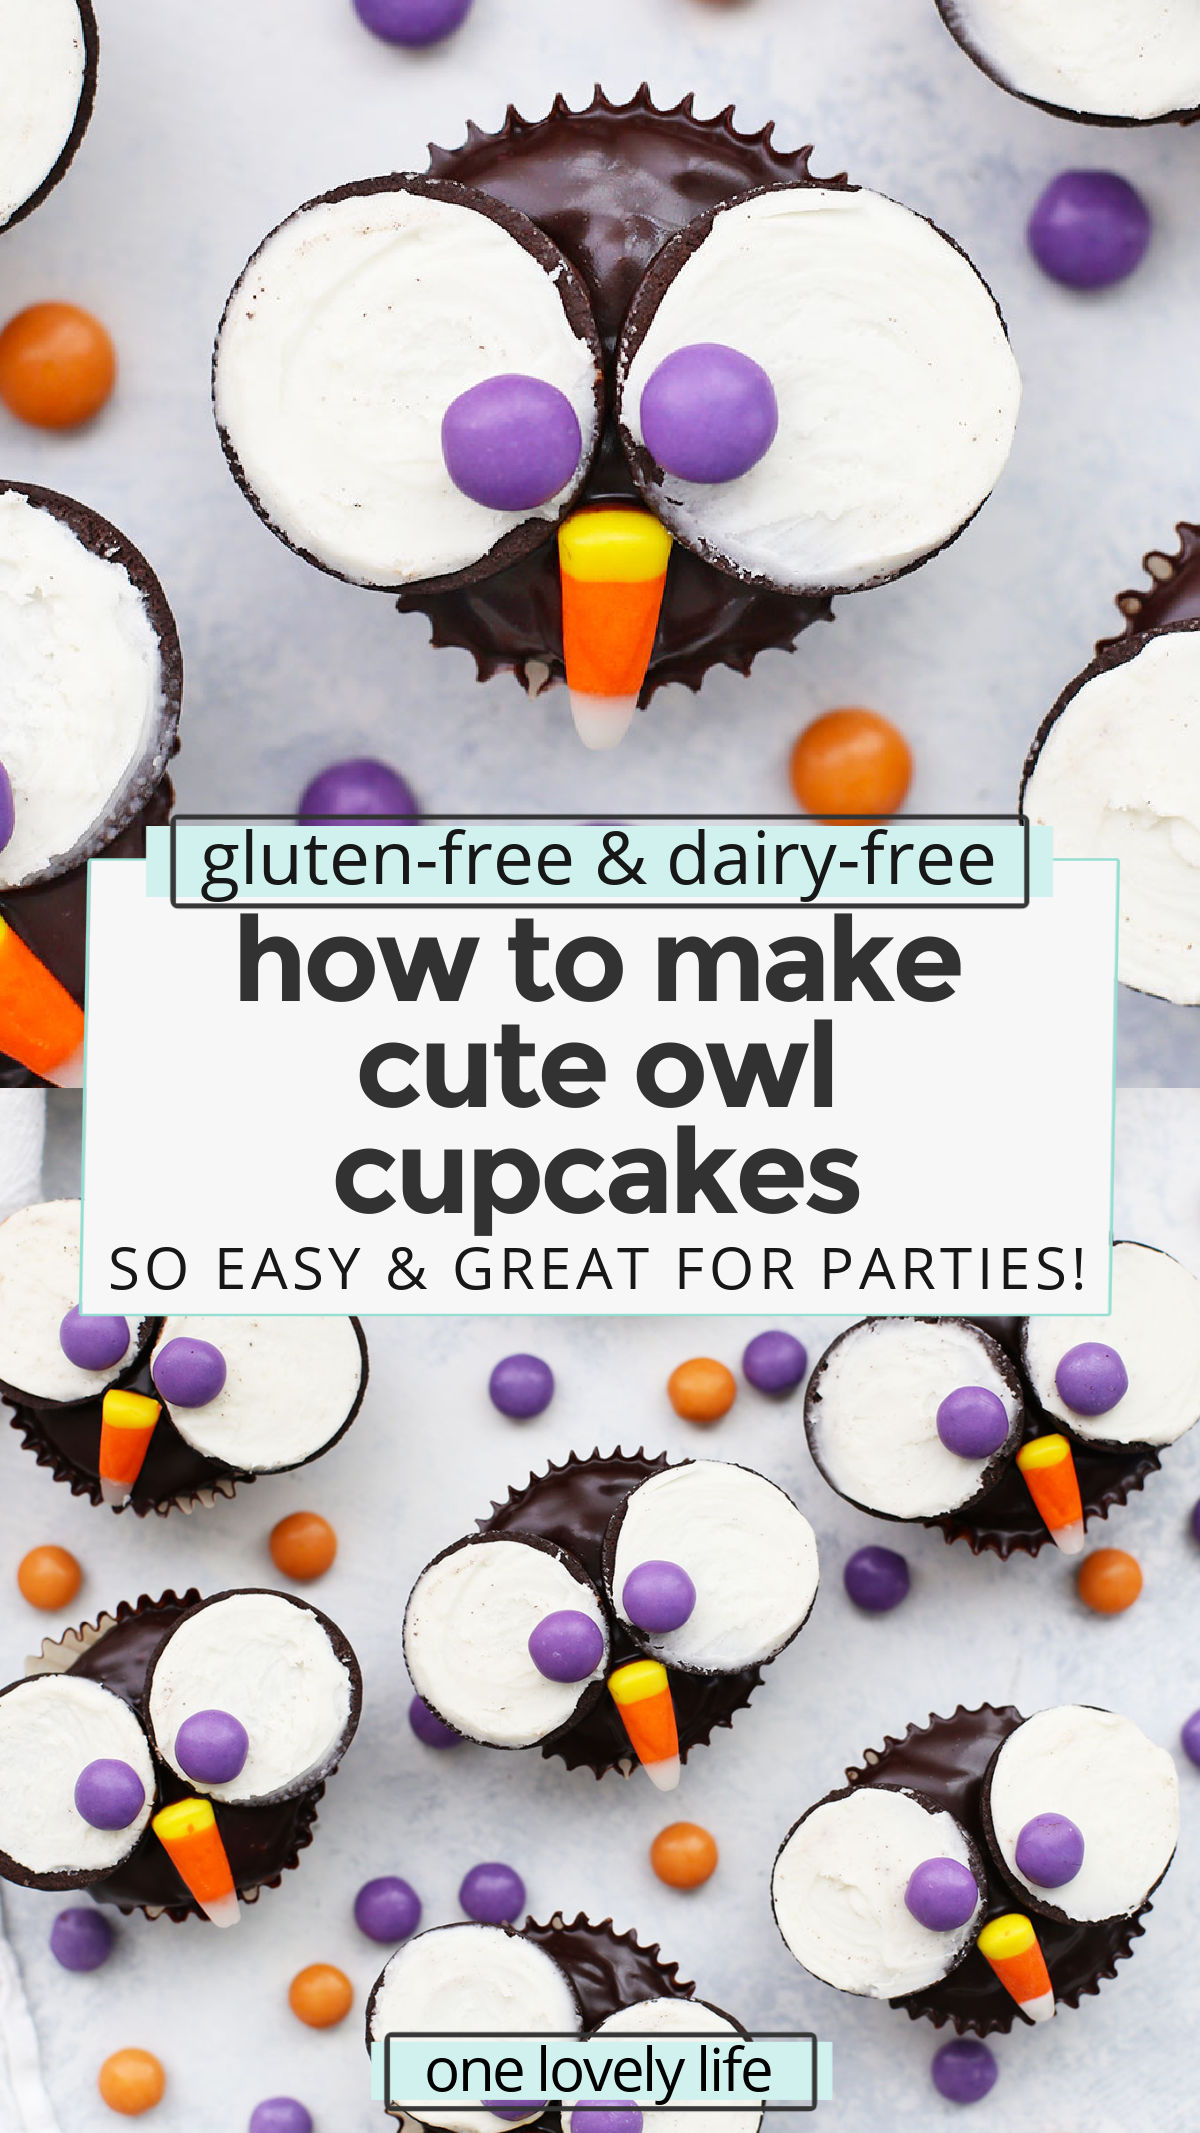 Owl Cupcakes - These adorable little owl cupcakes are perfect for parties or Halloween. Plus, it's easy to make them gluten free & dairy free! // gluten free cupcakes // owl cupcakes // vegan cupcakes // halloween cupcakes // gluten free halloween ideas // halloween treats // dairy free cupcakes // vegan chocolate frosting #owlcupcakes #halloweencupcakes #cupcakes #glutenfreecupcakes #cupcakedecorating